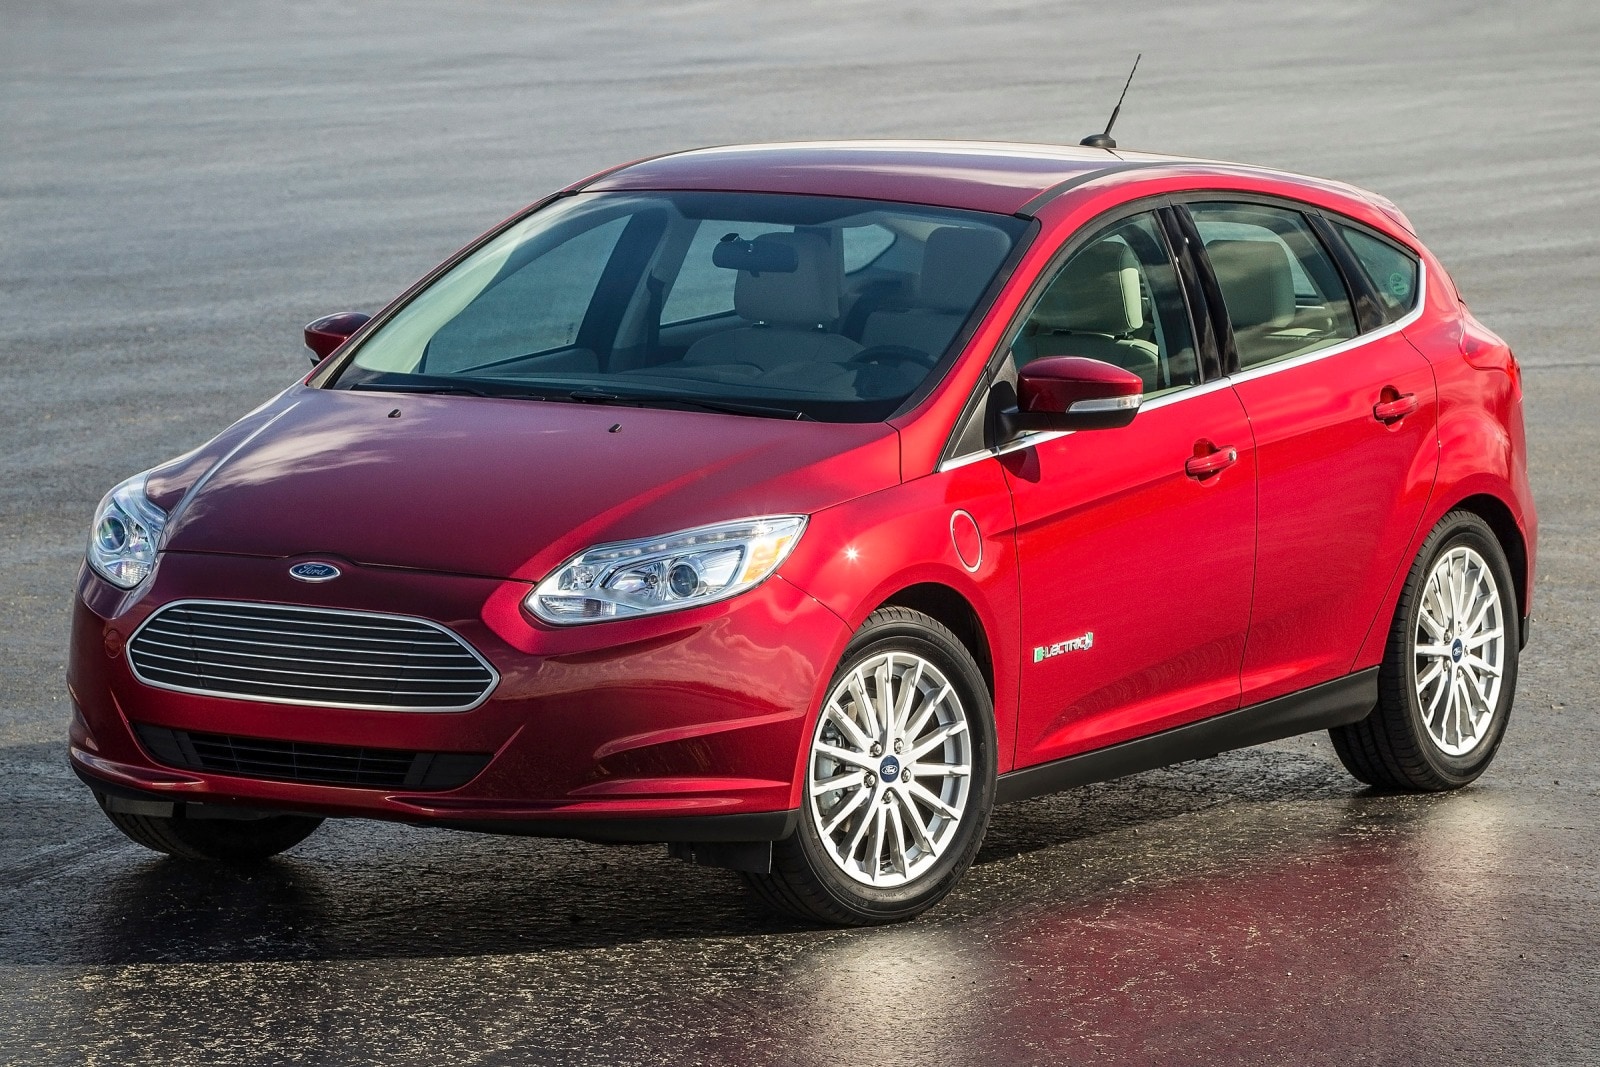 Used 2015 Ford Focus Electric Review | Edmunds